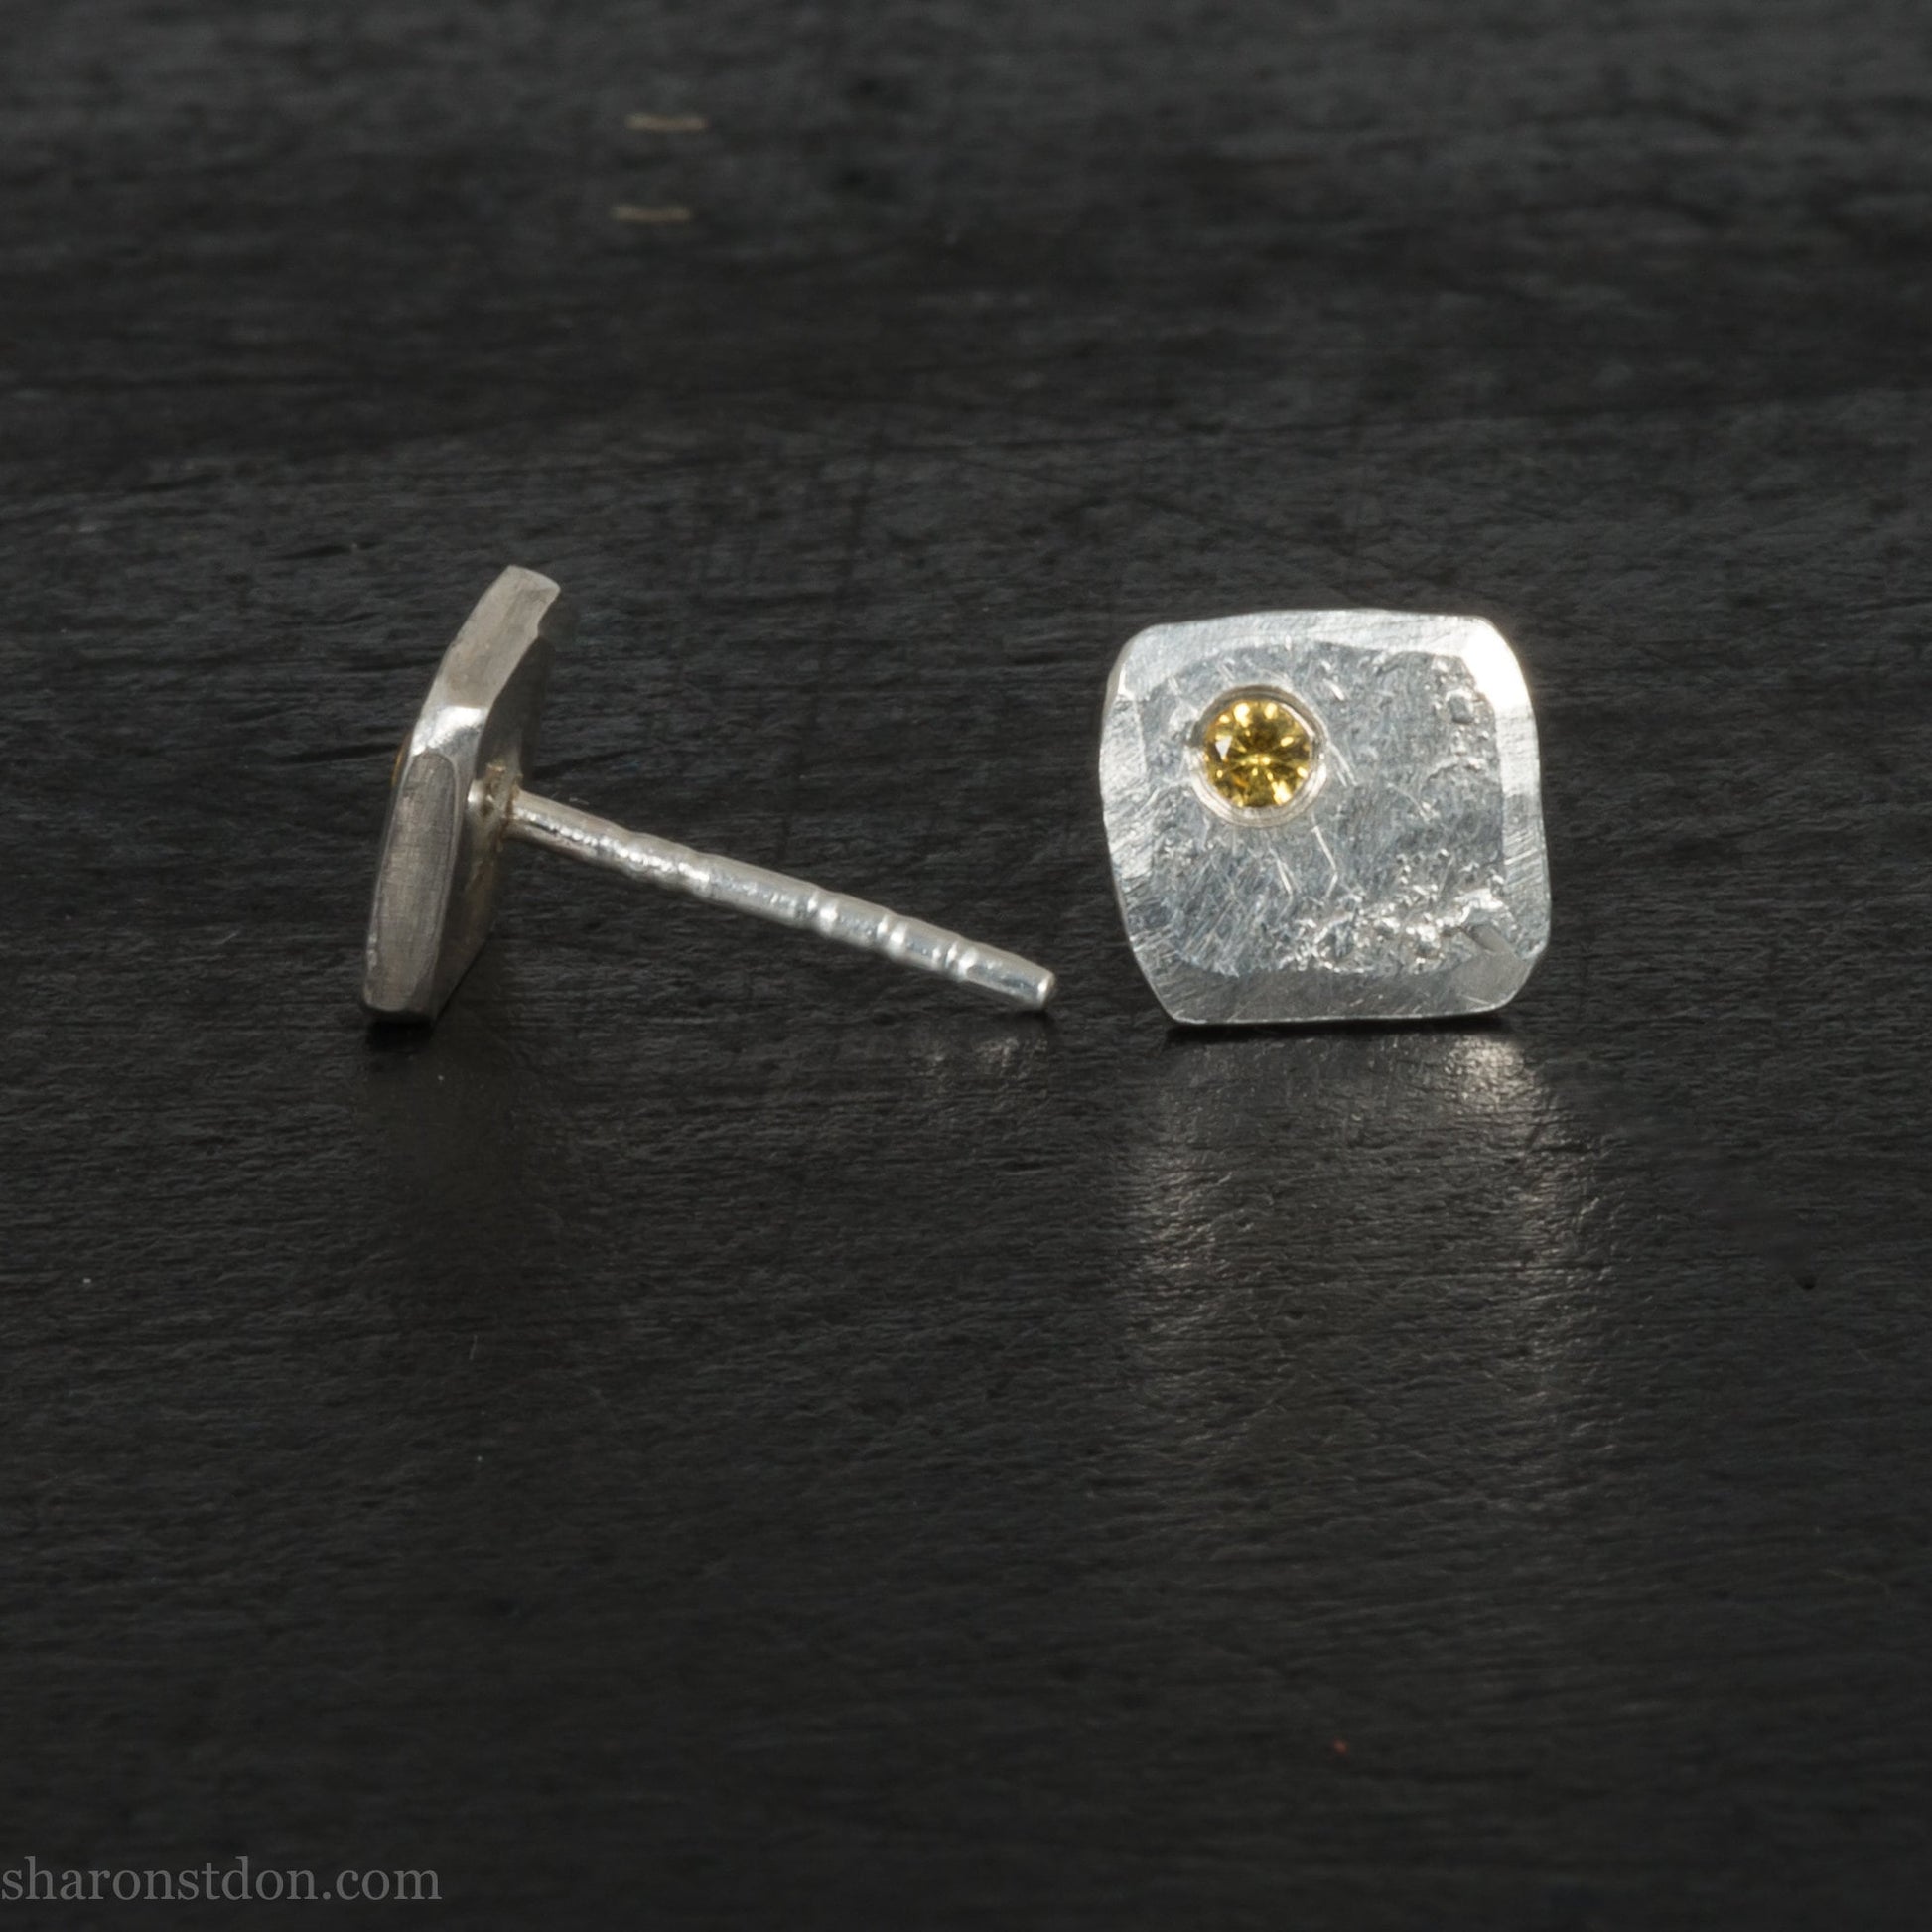 Handmade 925 sterling silver stud earrings with golden yellow topaz gemstones. Small square stud earrings made by Sharon SaintDon in North America.